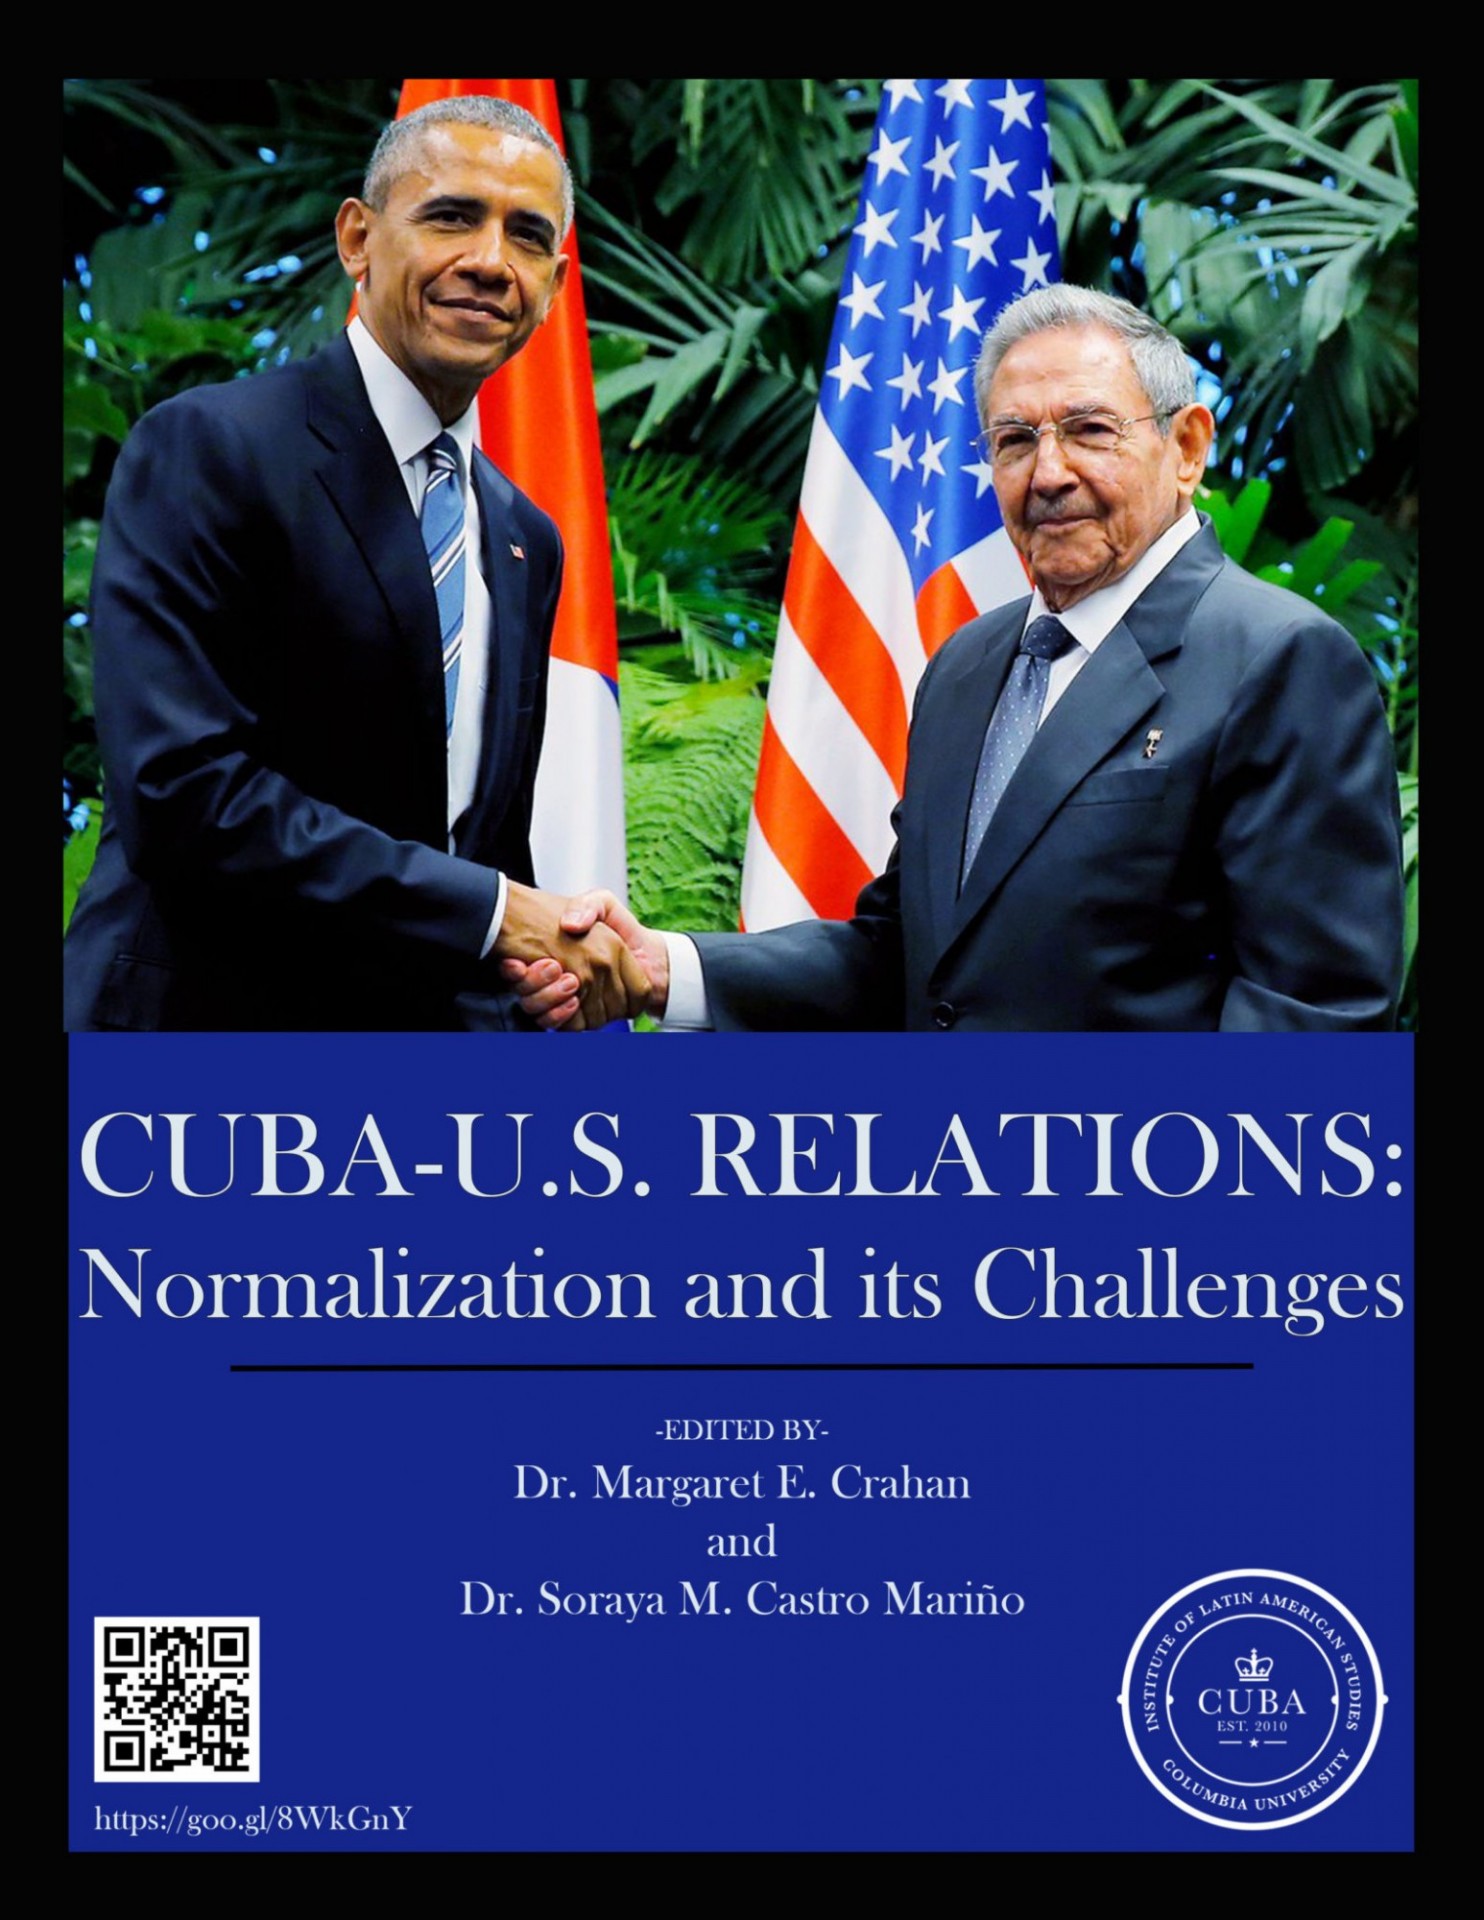 Presidents Barack Obama of the US and Raul Castro of Cuba locked in handshake while smiling at camera 